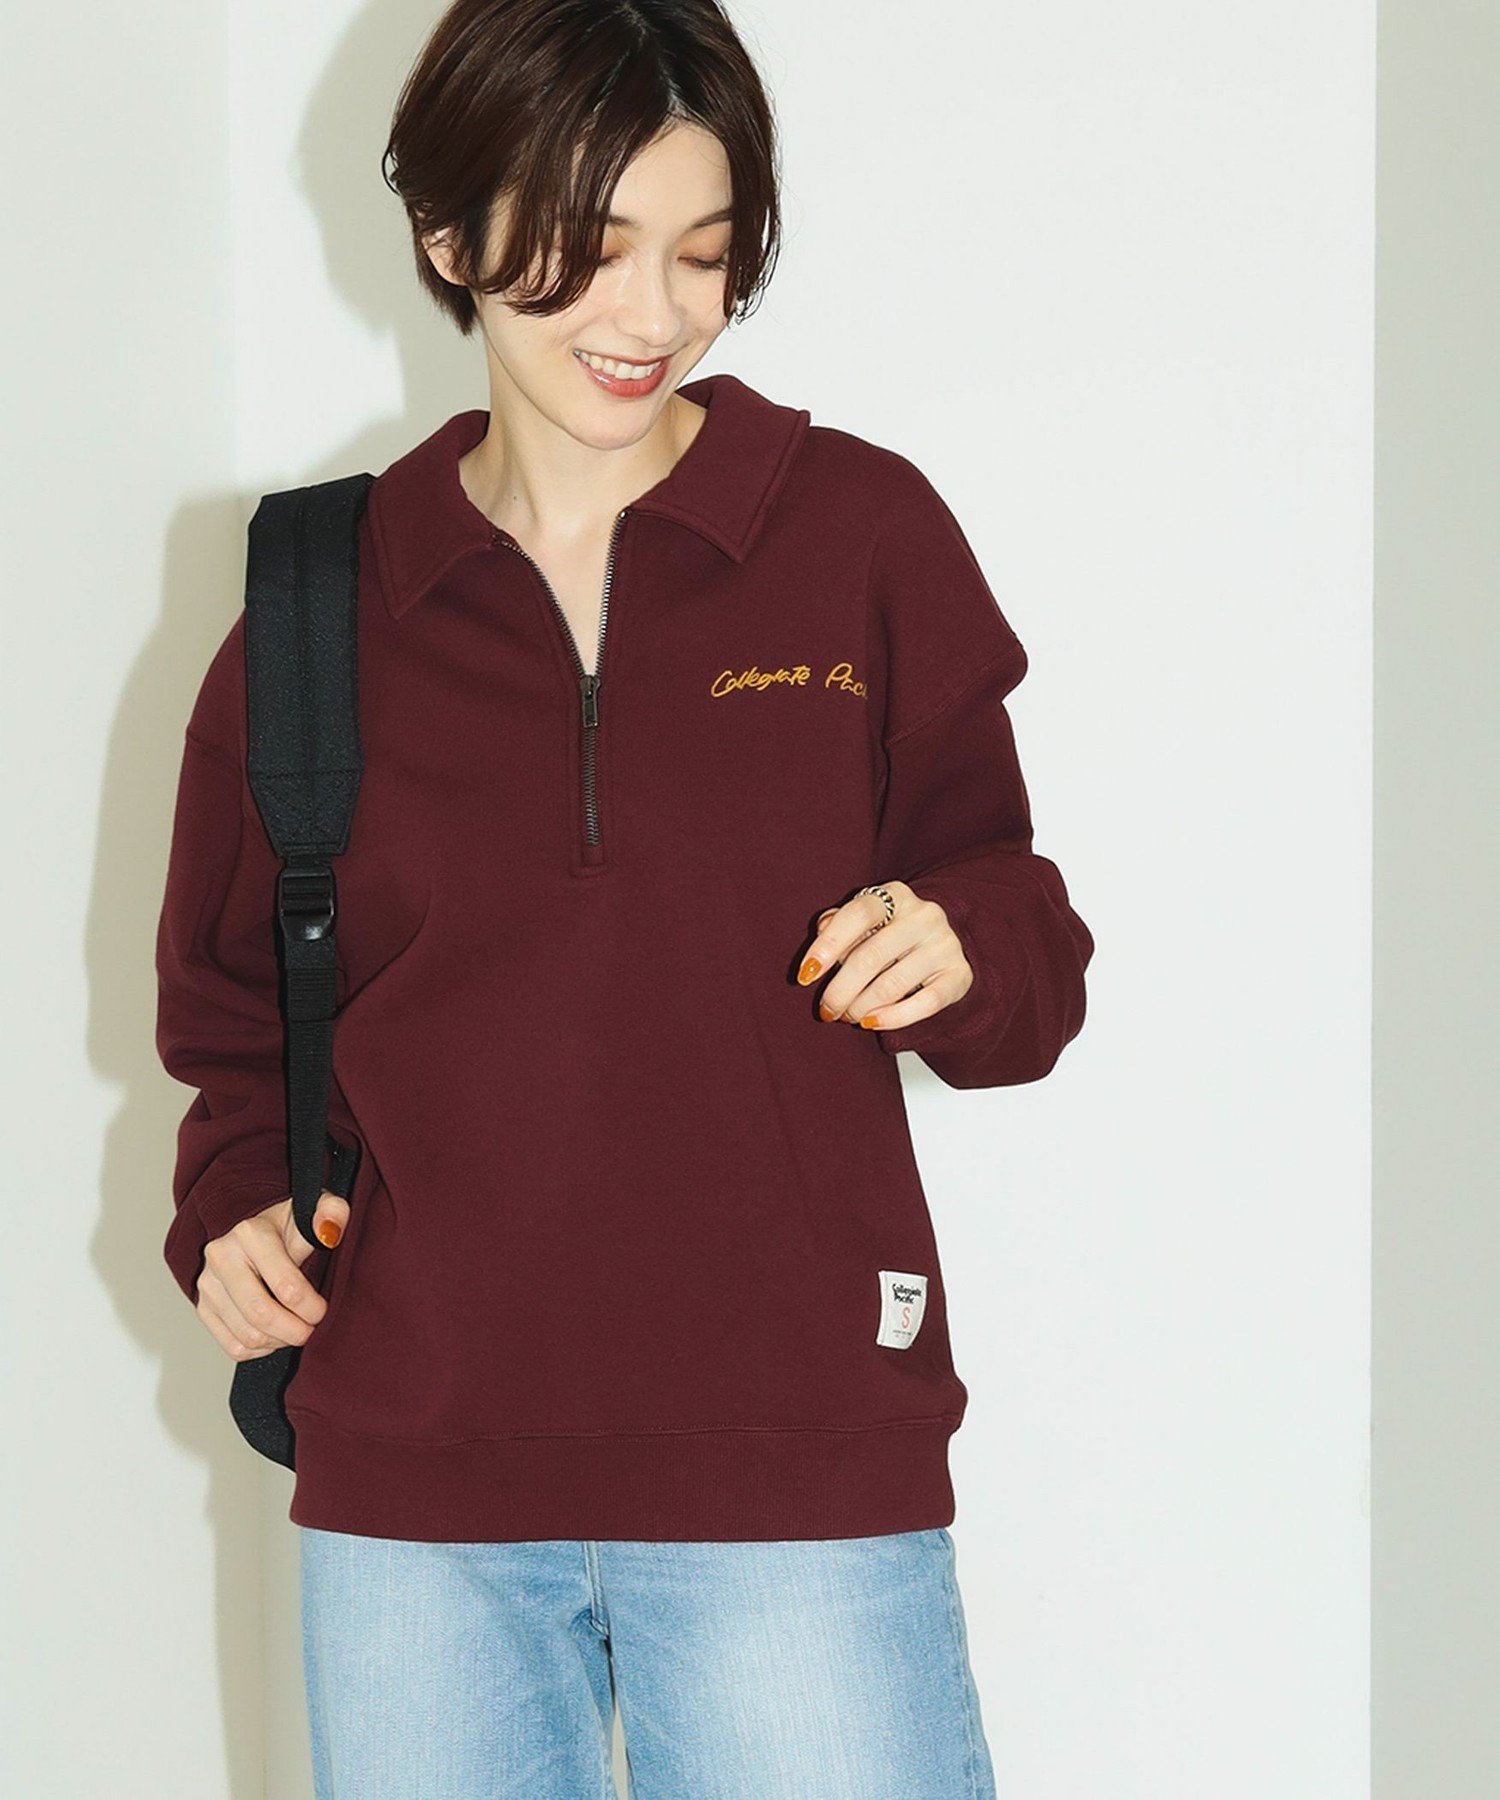 Collegiate Pacific * B:MING by BEAMS / 別注 ハーフジップ スウェット 23AW